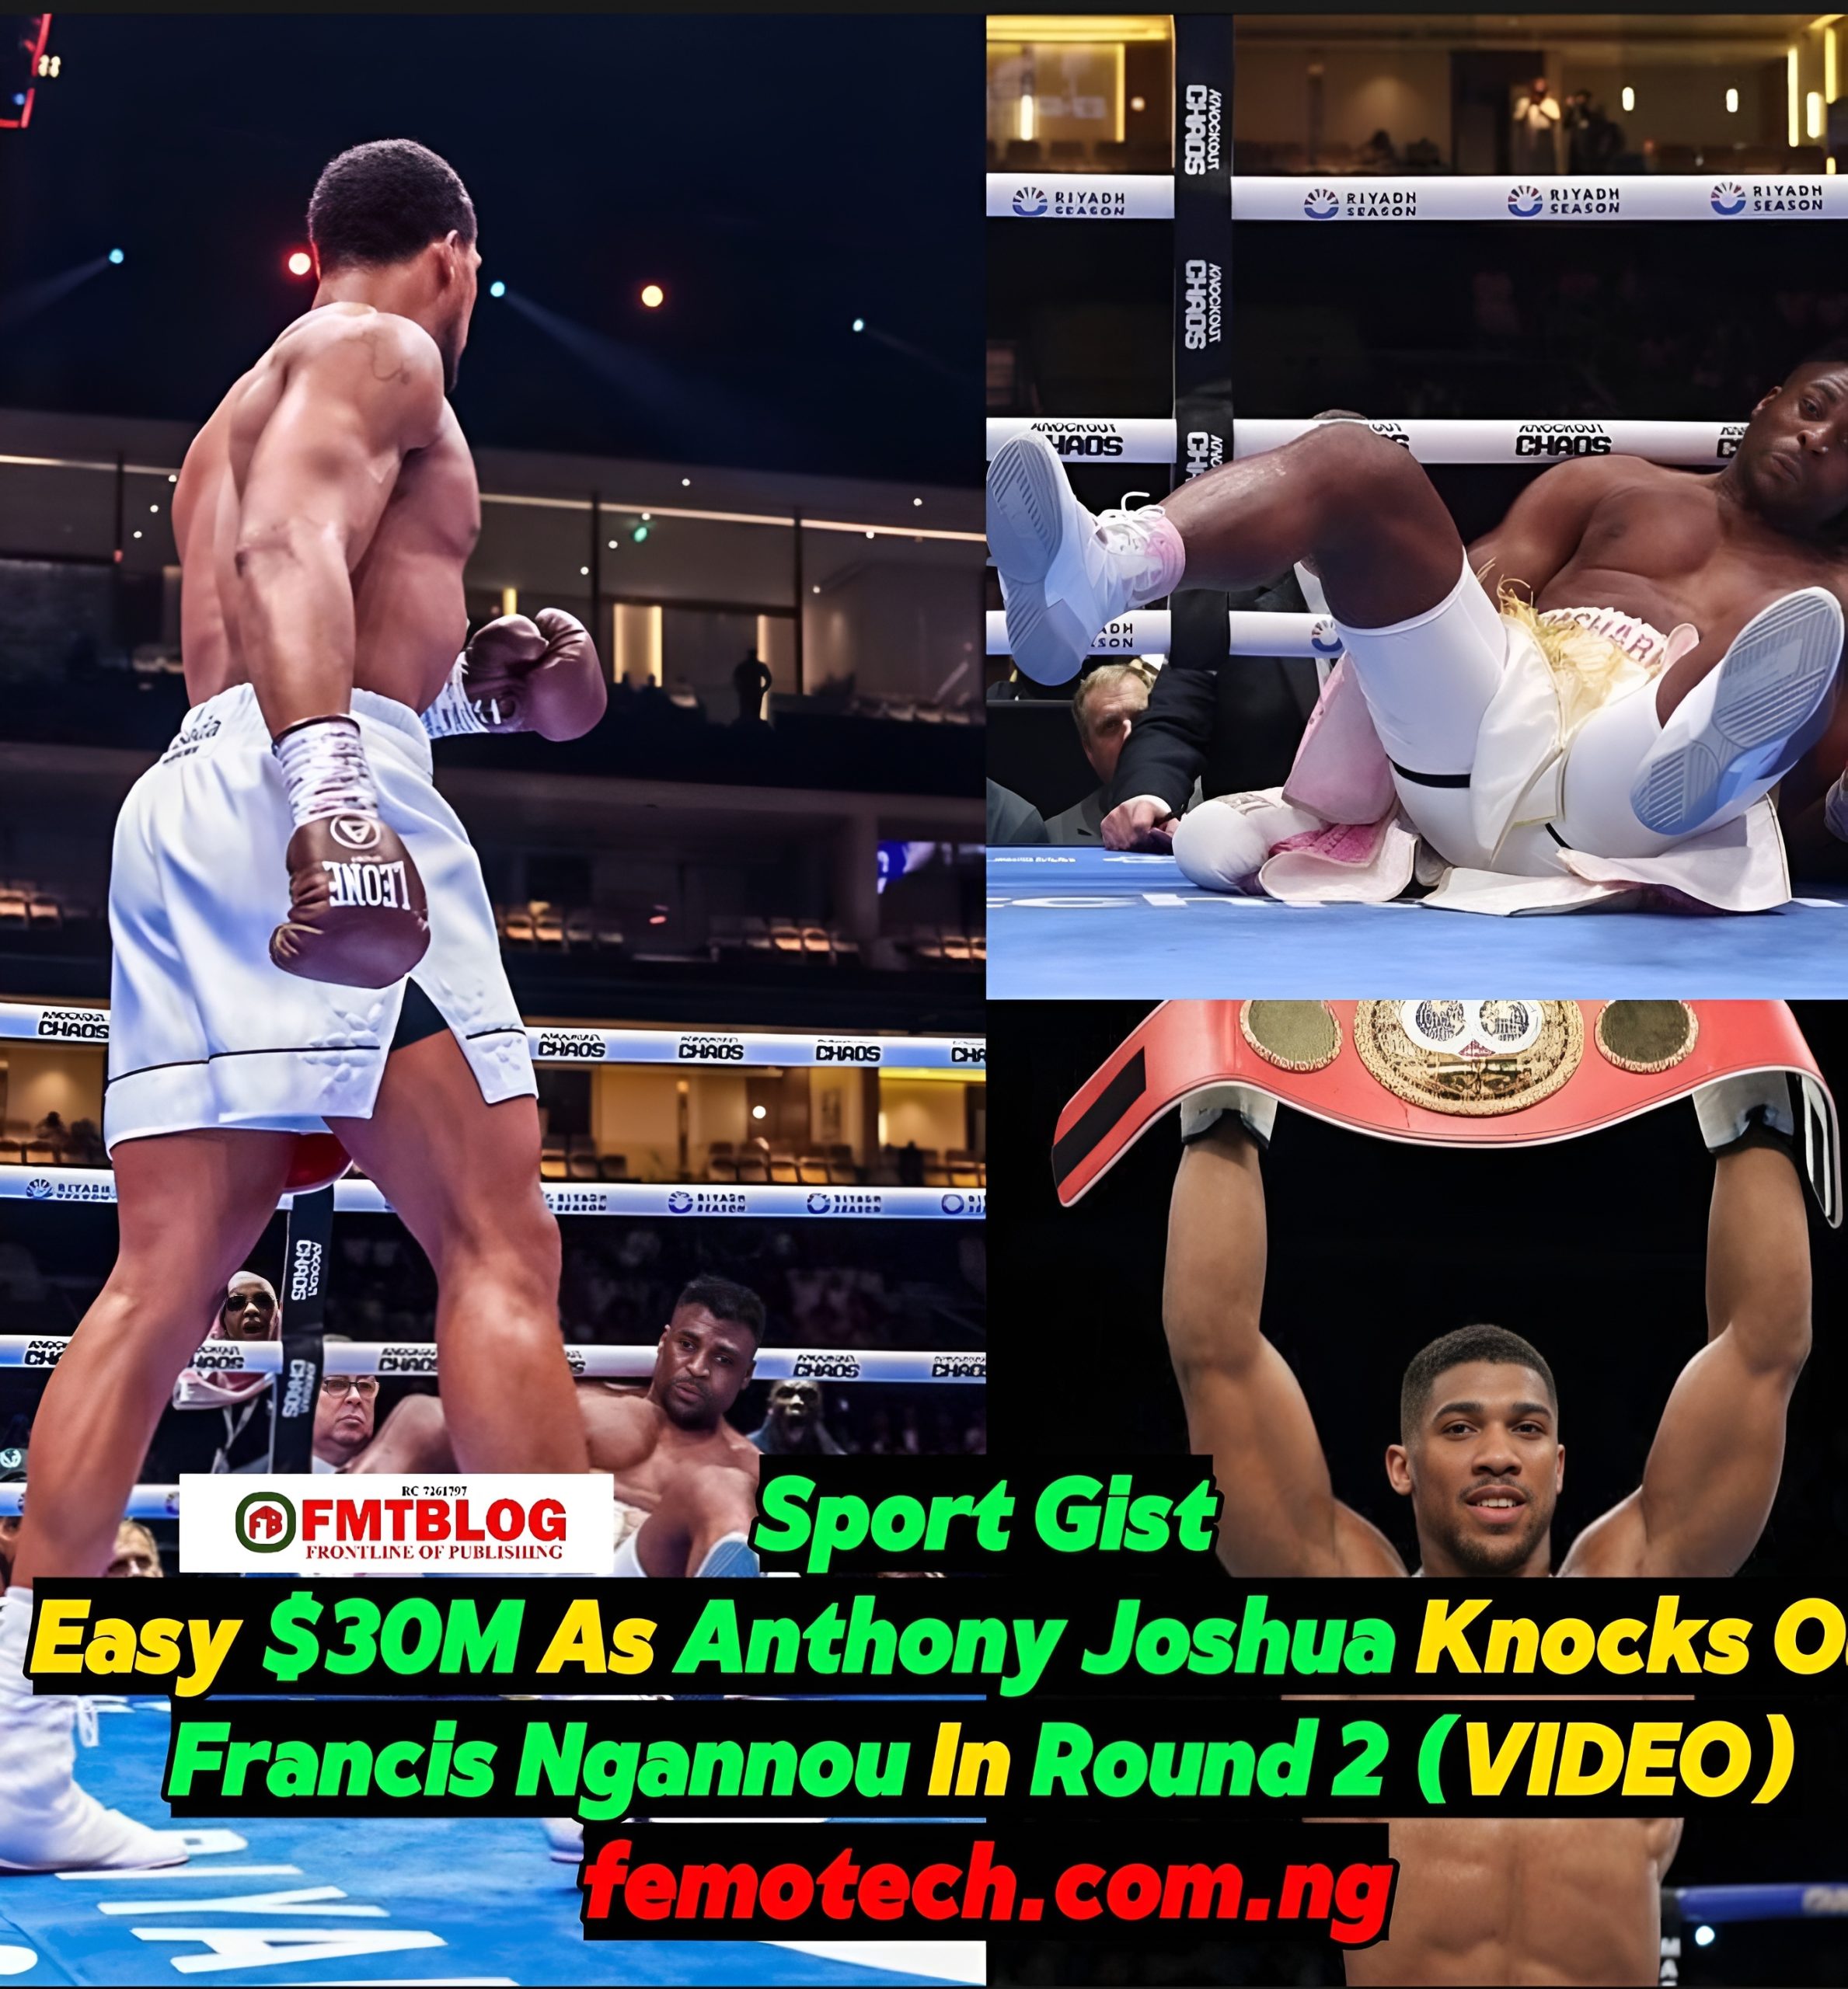 Easy $30M As Anthony Joshua Knocks Out Francis Ngannou in Round 2 (Video )